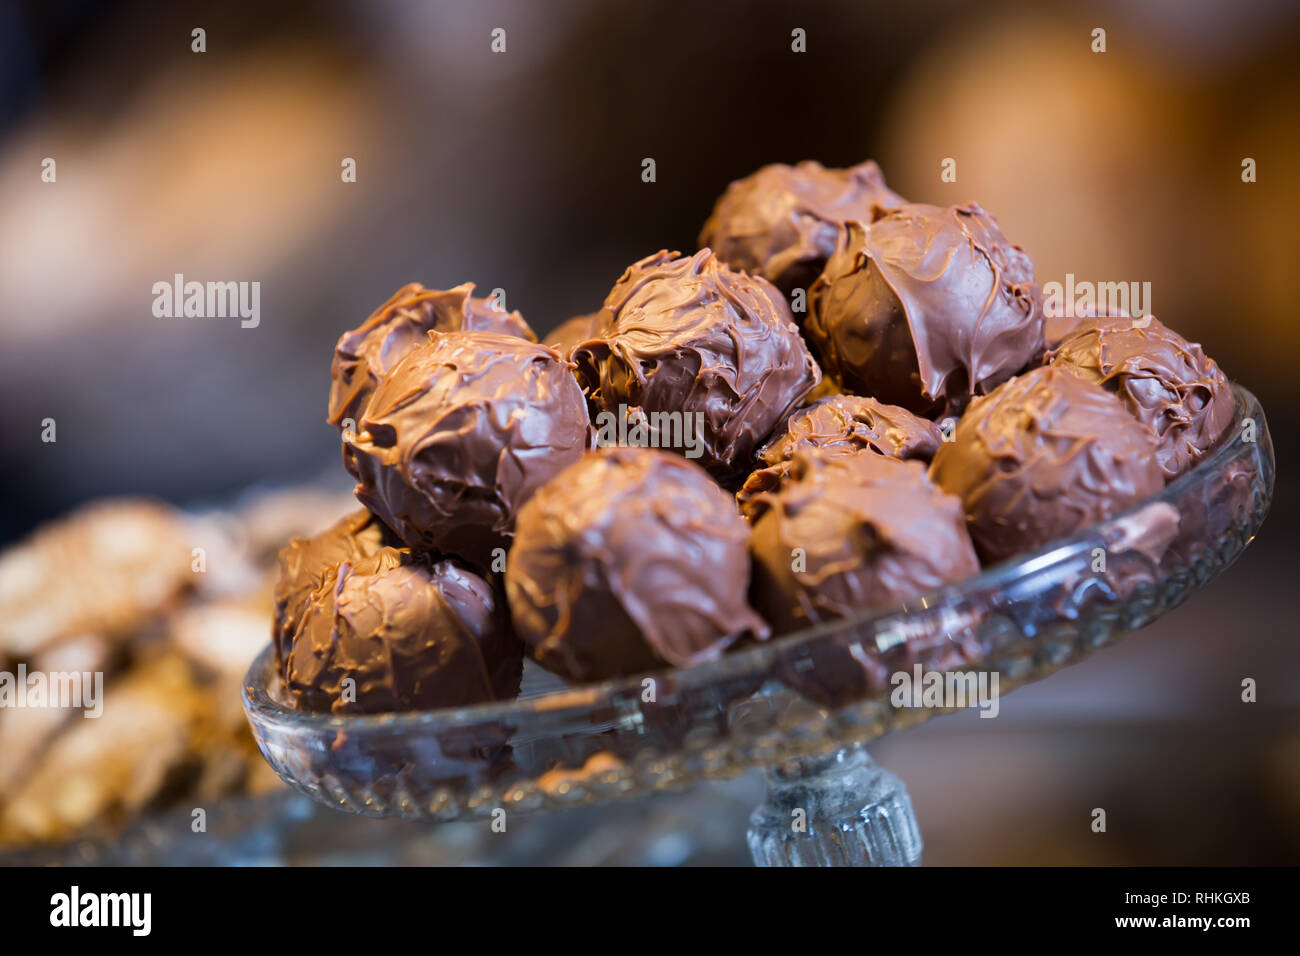 Sweet-stuff covered with chocolate syrup at bakery display Stock Photo